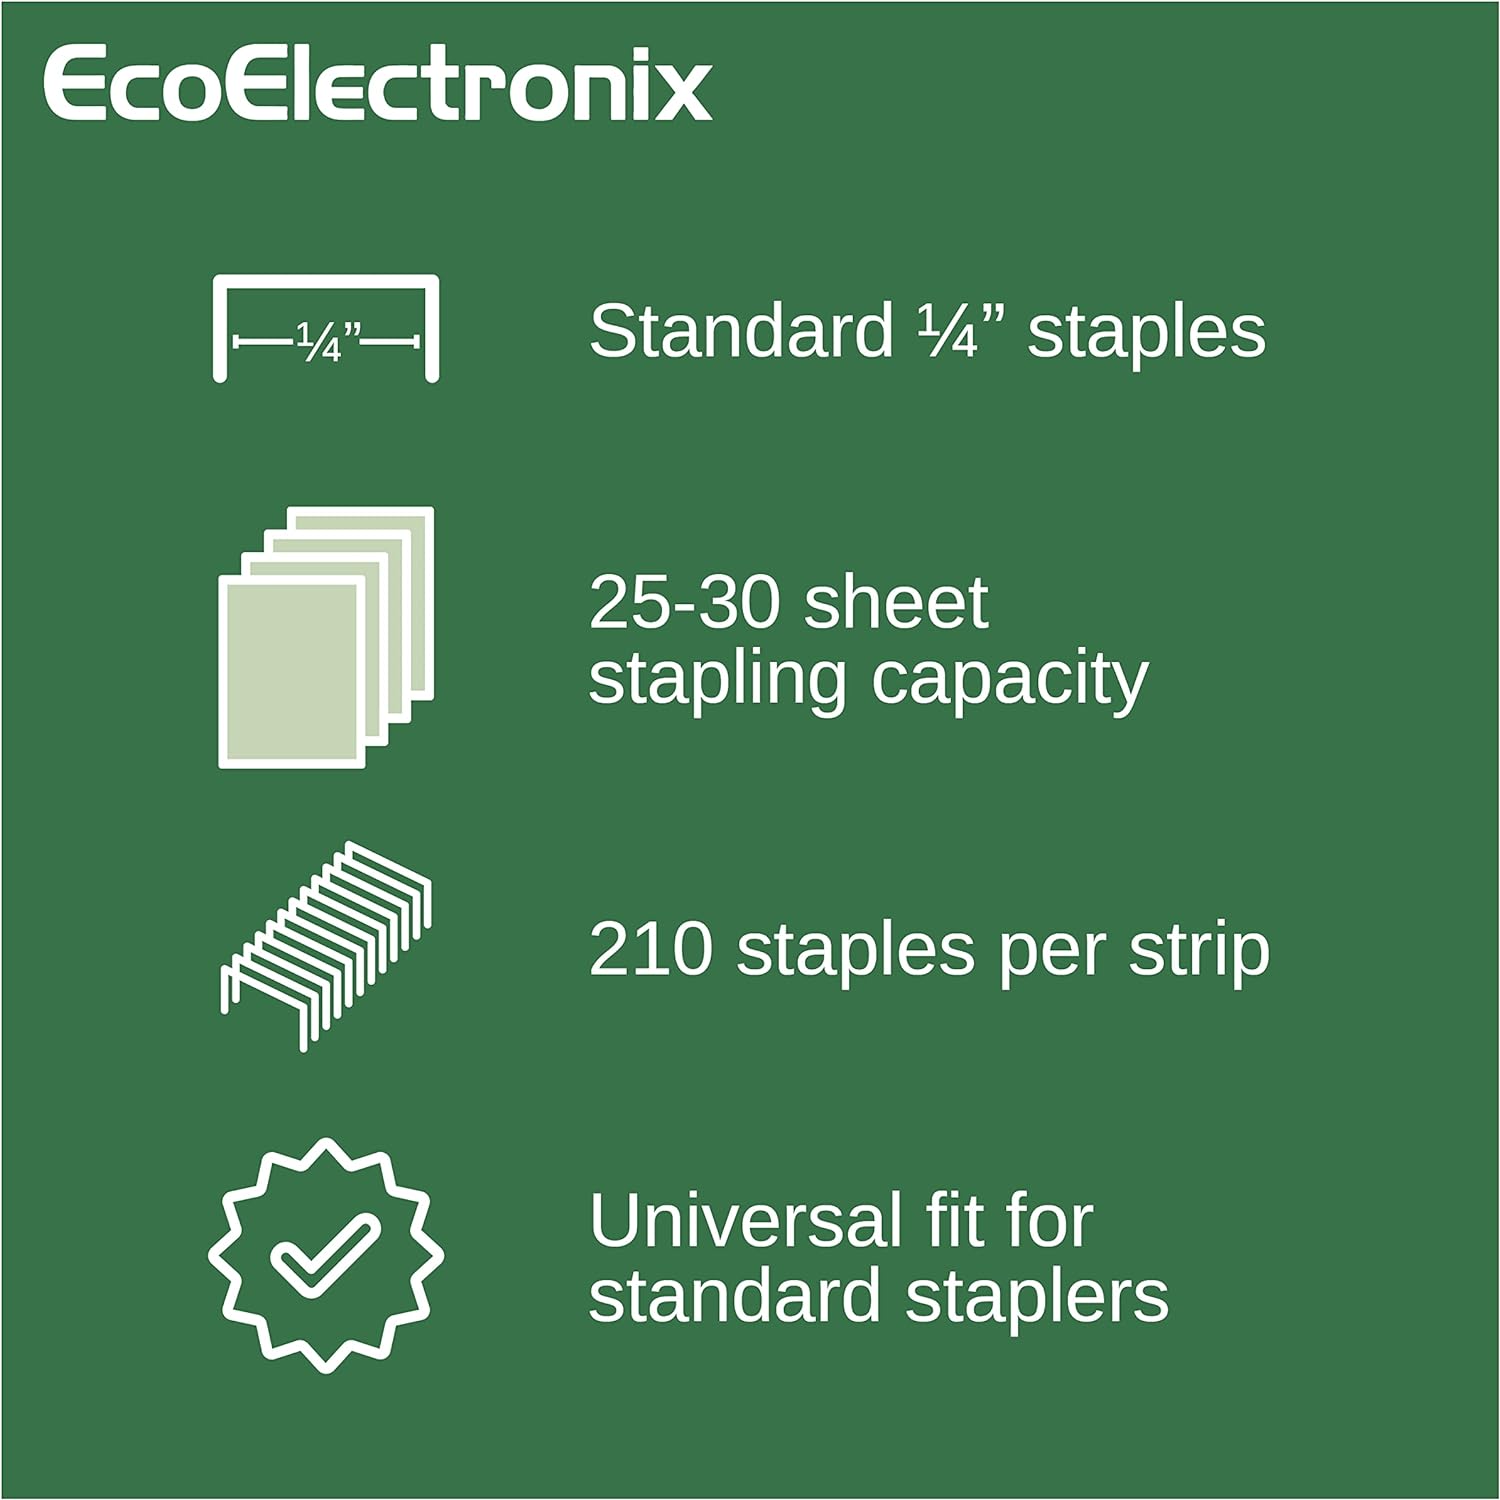 Eco Electronix Standard Staples specifications